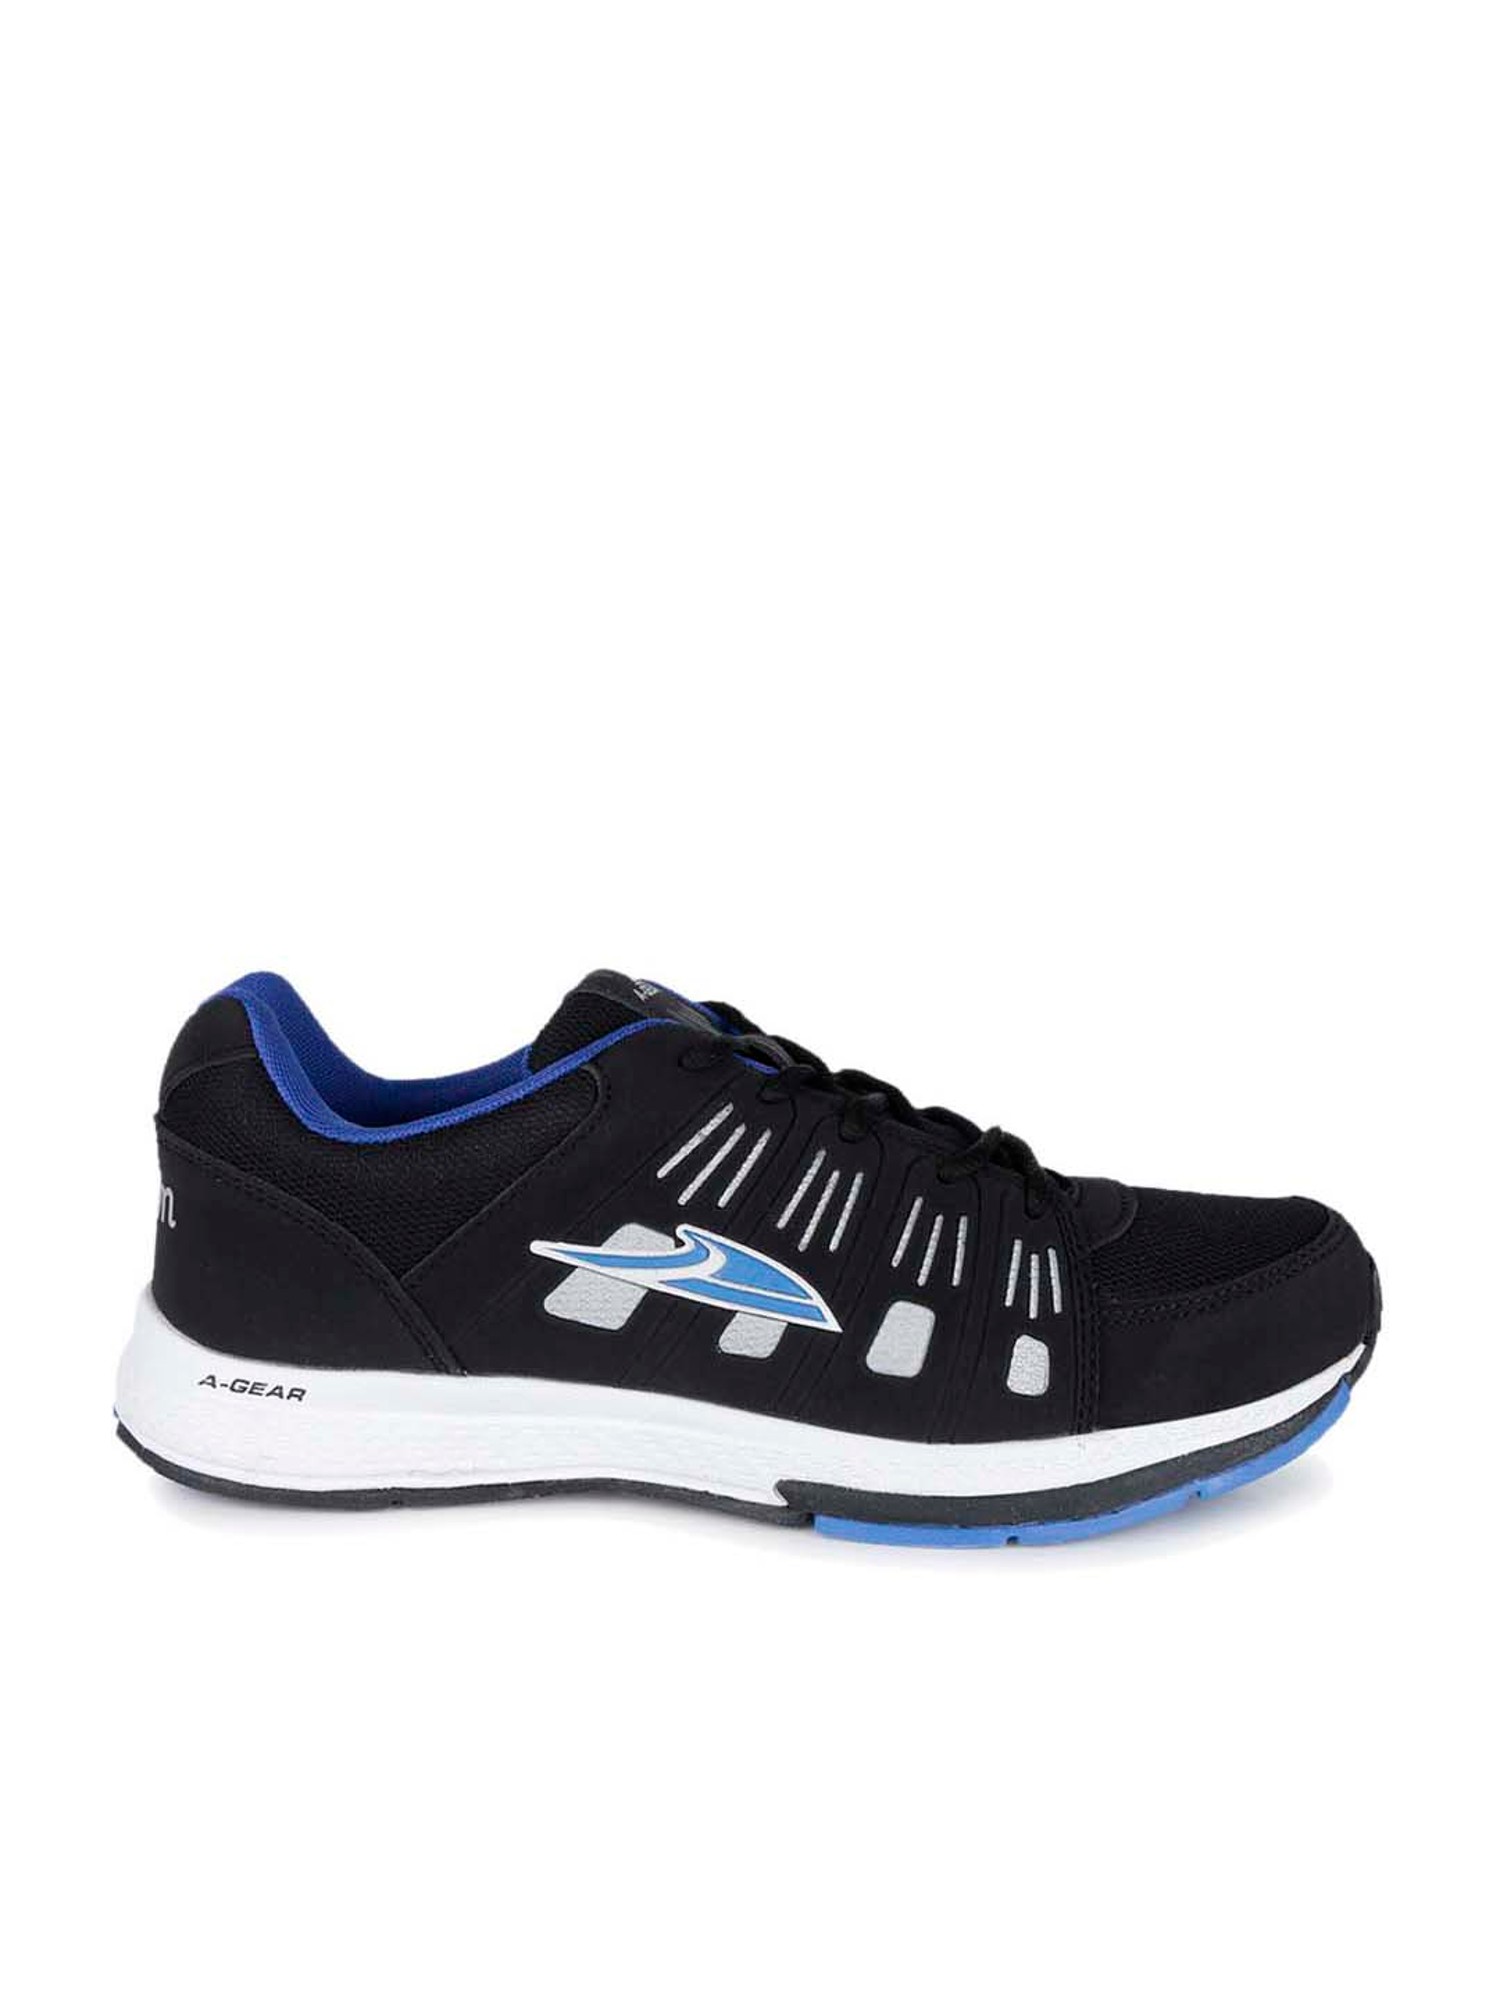 CAMPUS A-Gear from House of CAMPUS, Running Shoes For Men - Buy CAMPUS A- Gear from House of CAMPUS, Running Shoes For Men Online at Best Price -  Shop Online for Footwears in